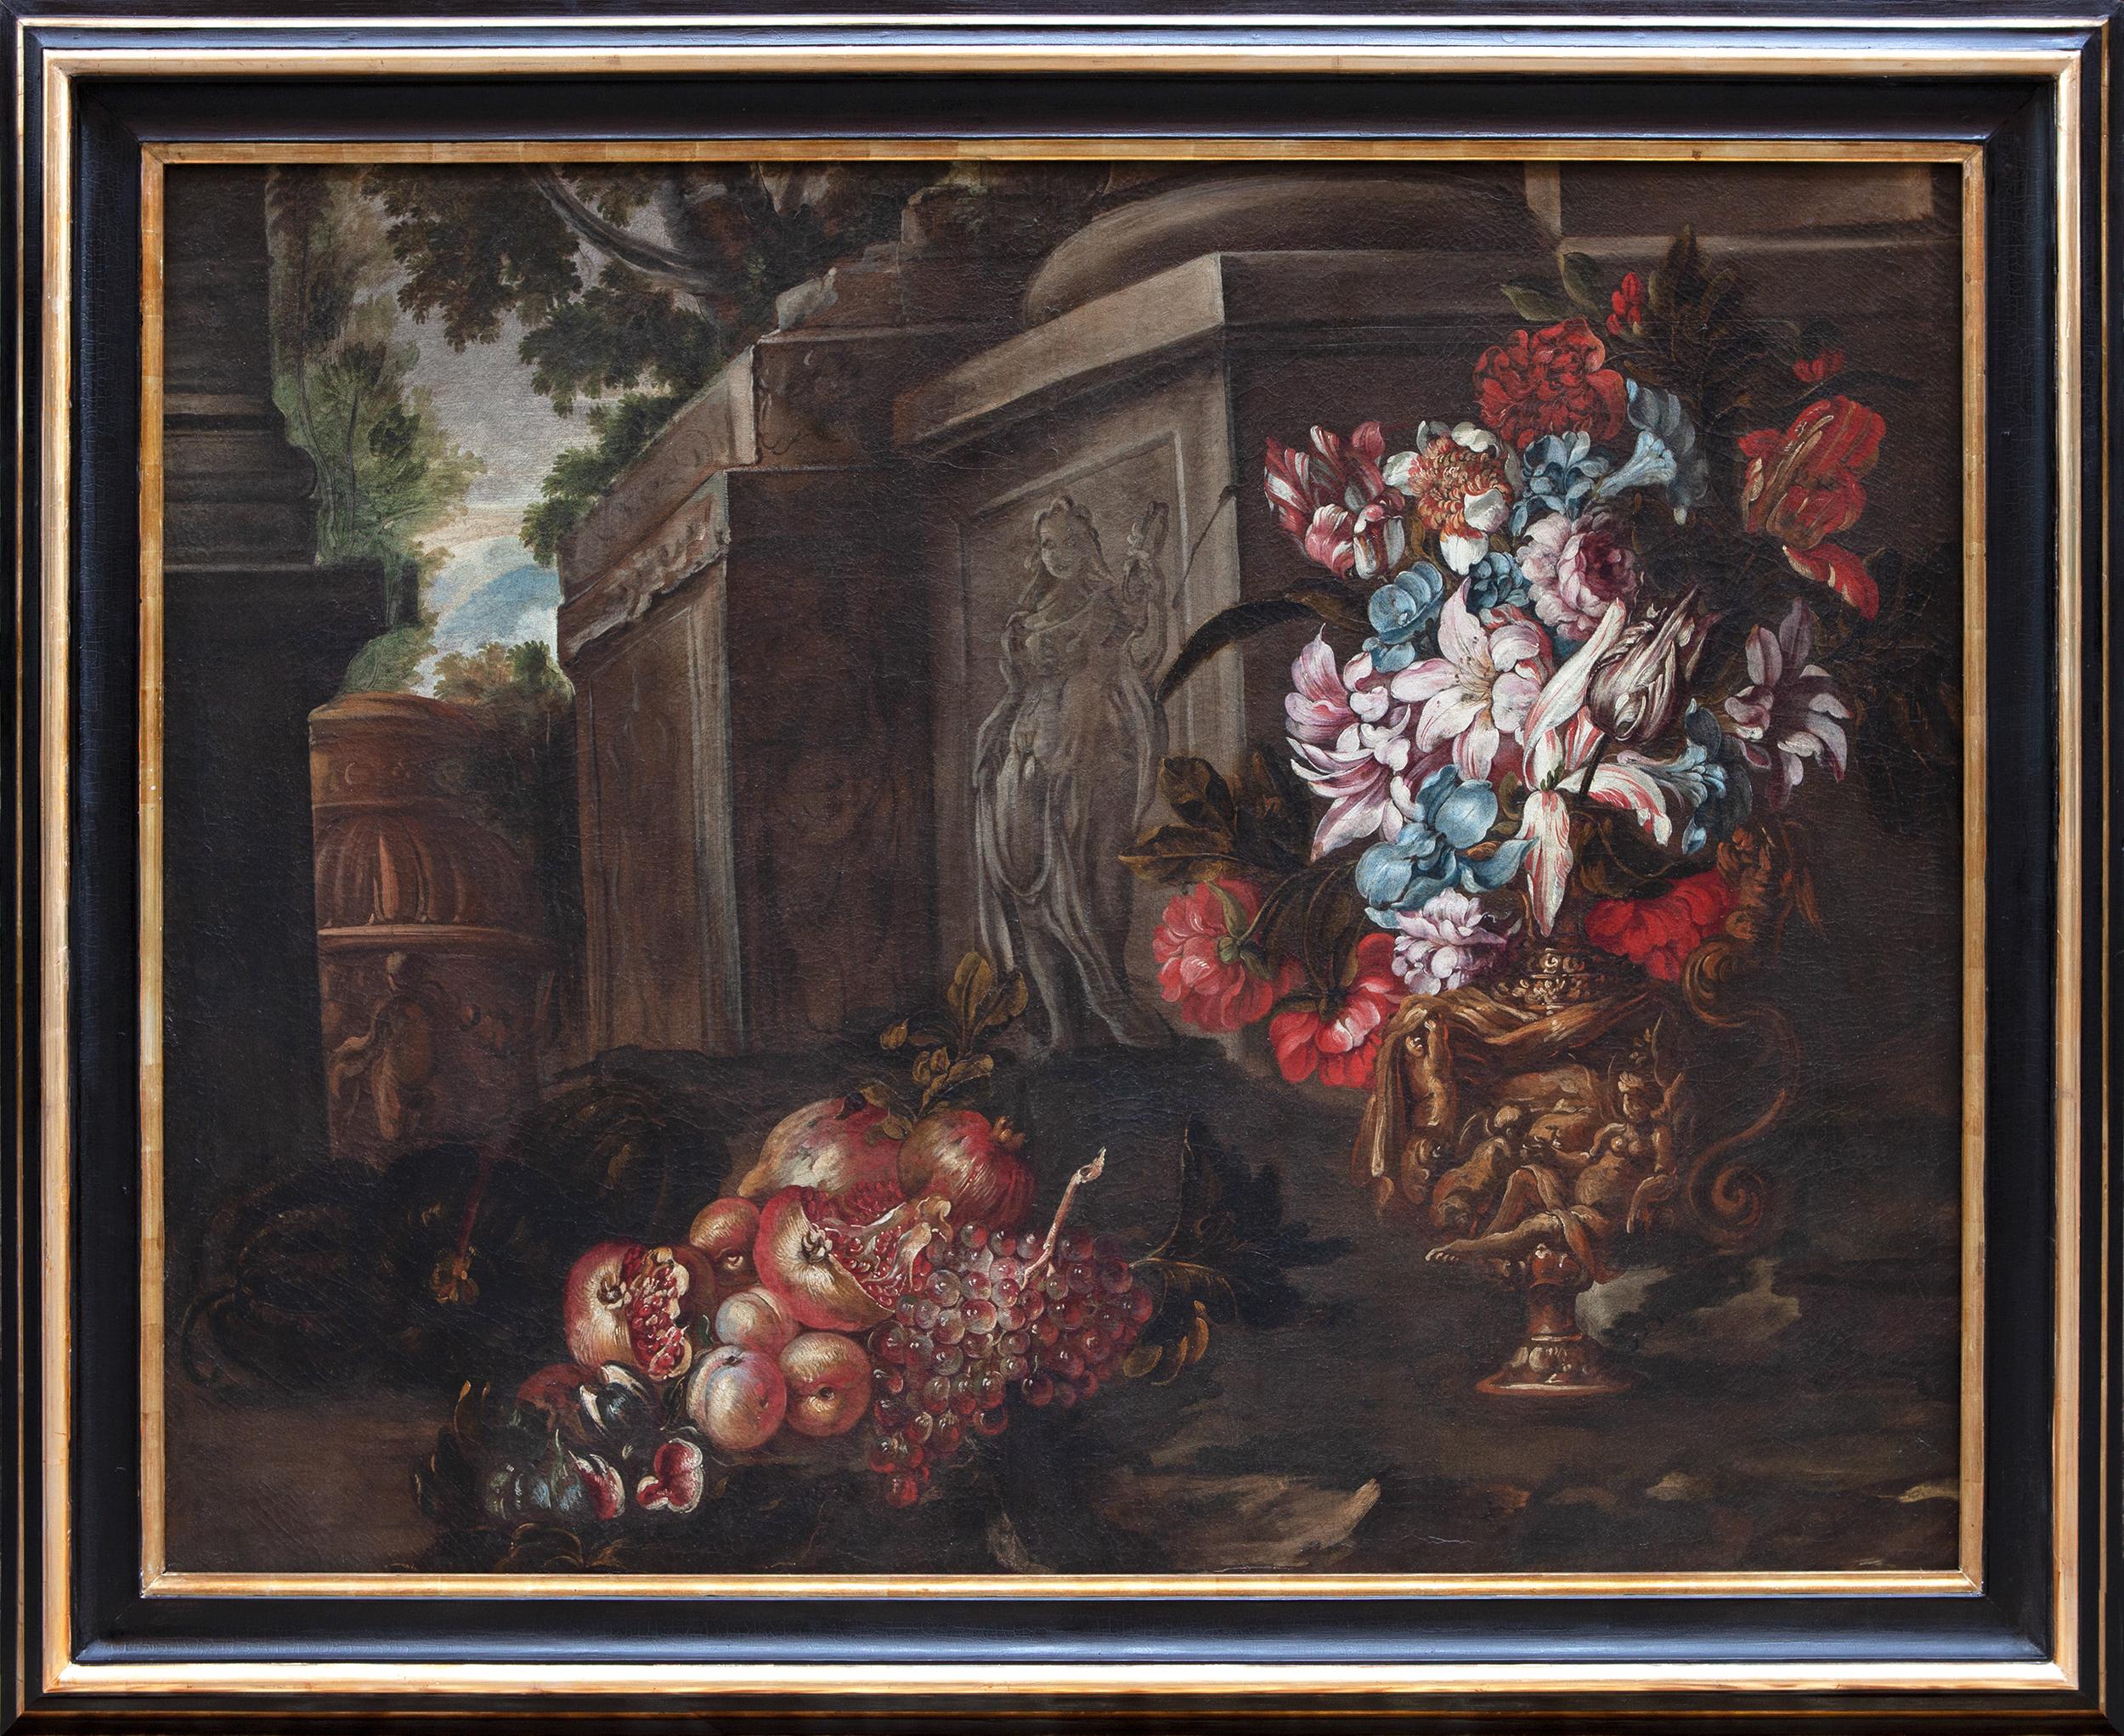 Unknown Still-Life Painting - Still life with vase of flowers, fruits and architectural ruins 